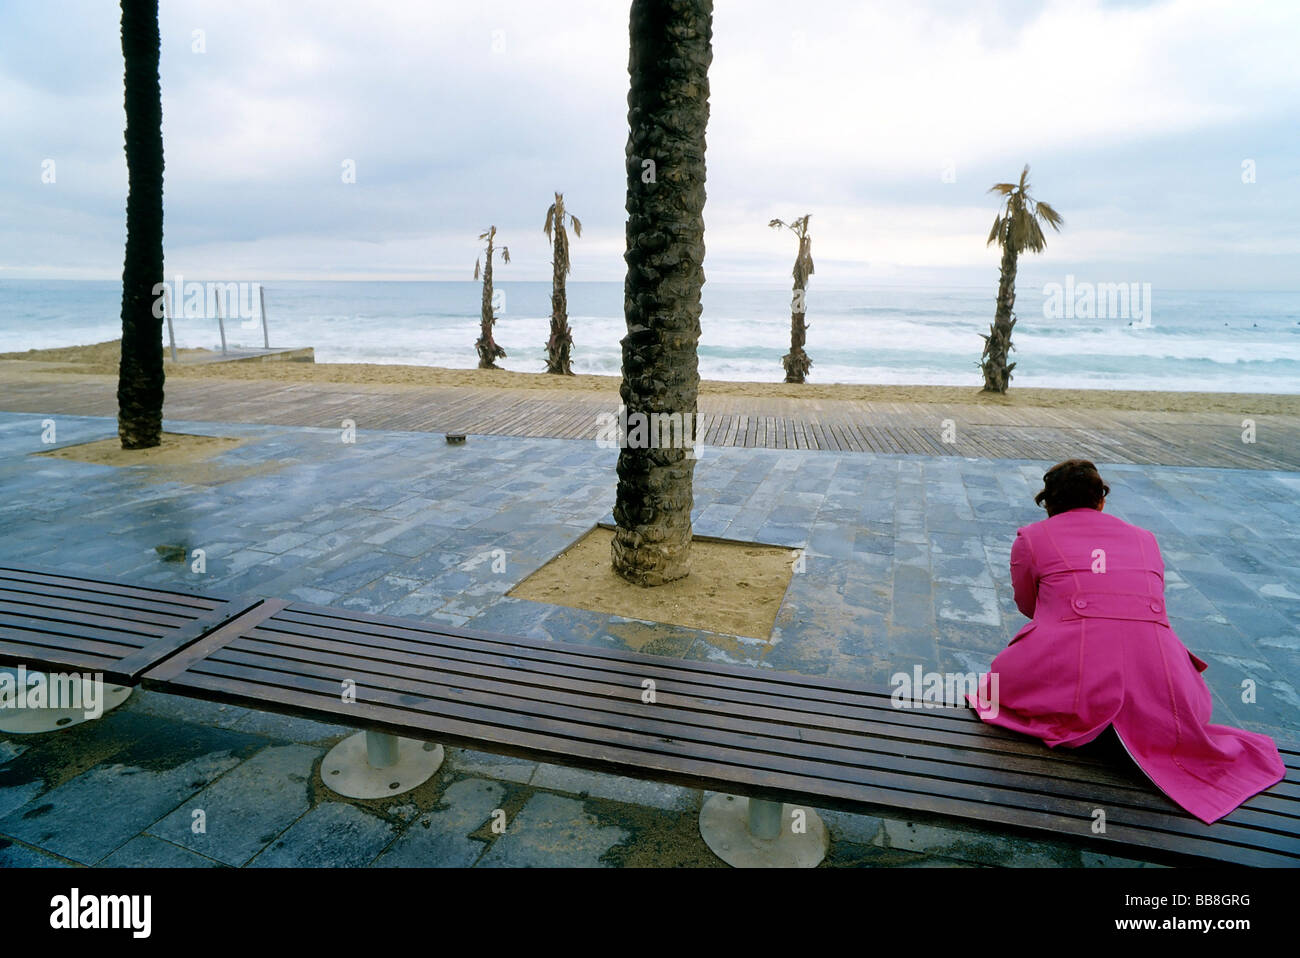 Lonesome woman wearing a pink coat sitting on a bench and looking at the ocean, promenade, Barcelona, Spain, Europe Stock Photo